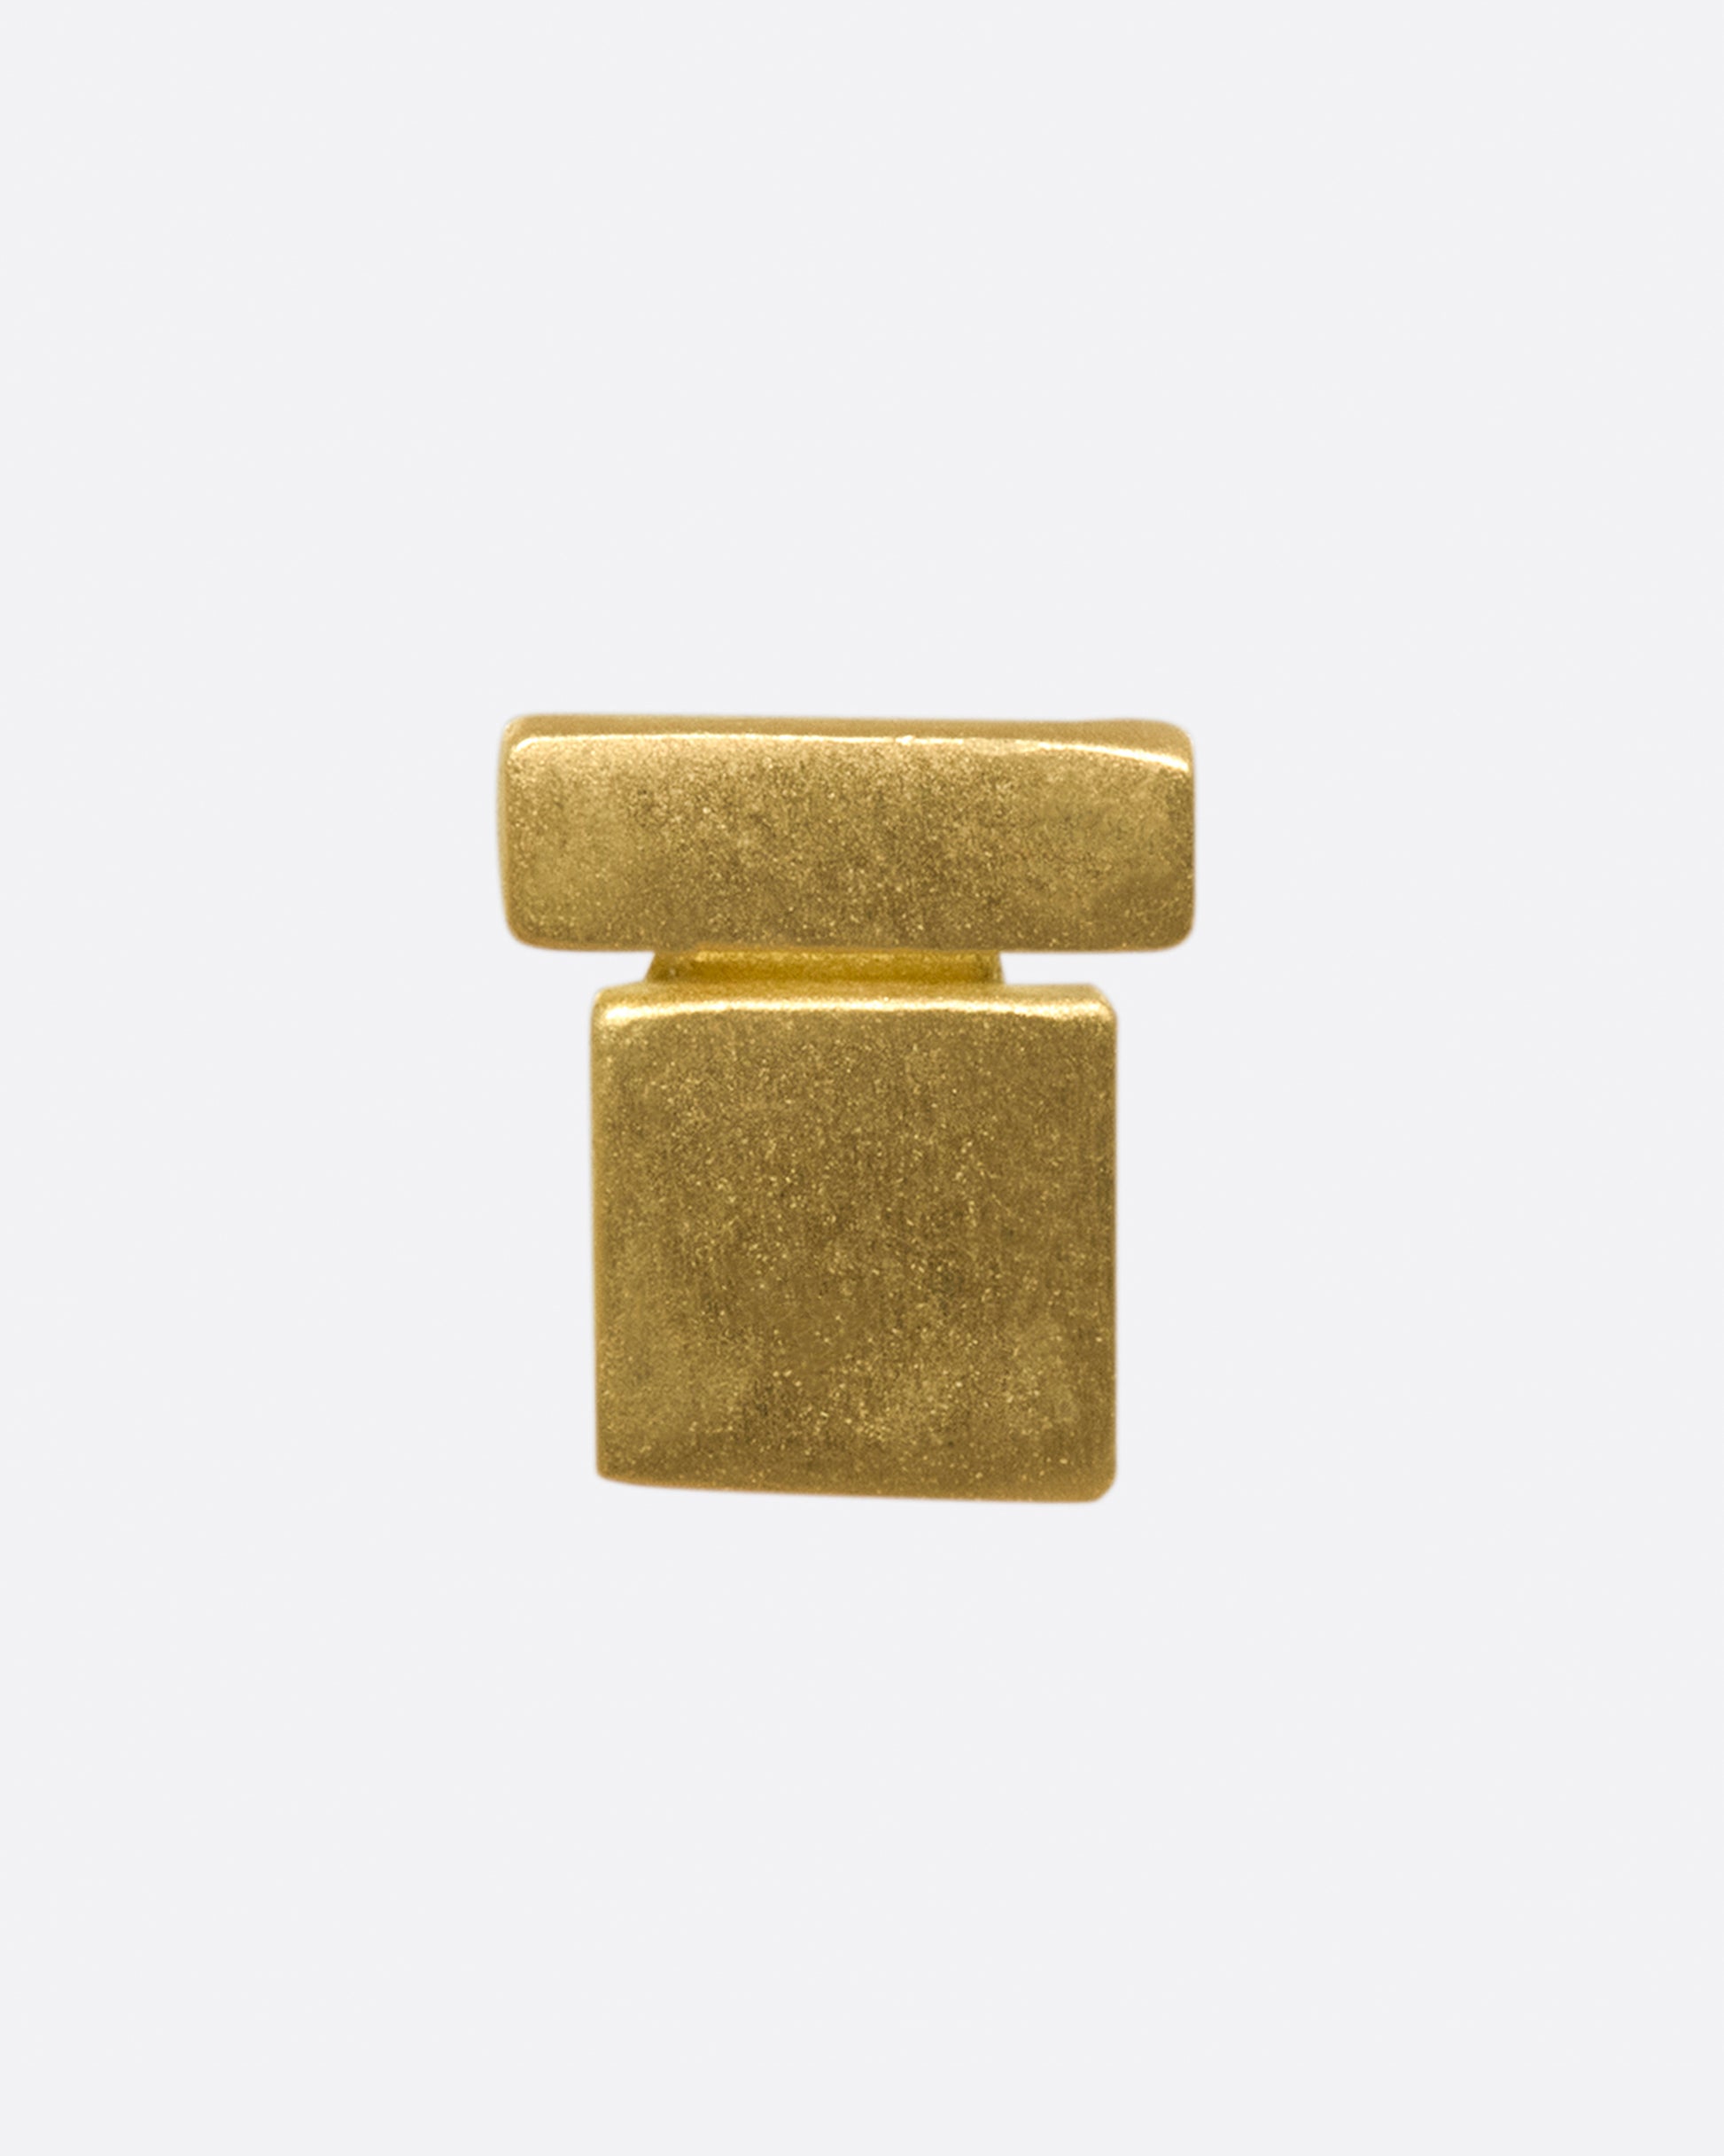 Designed by Adorned founder Lori Leven, this earring feels soft and sits low and close to the ear.